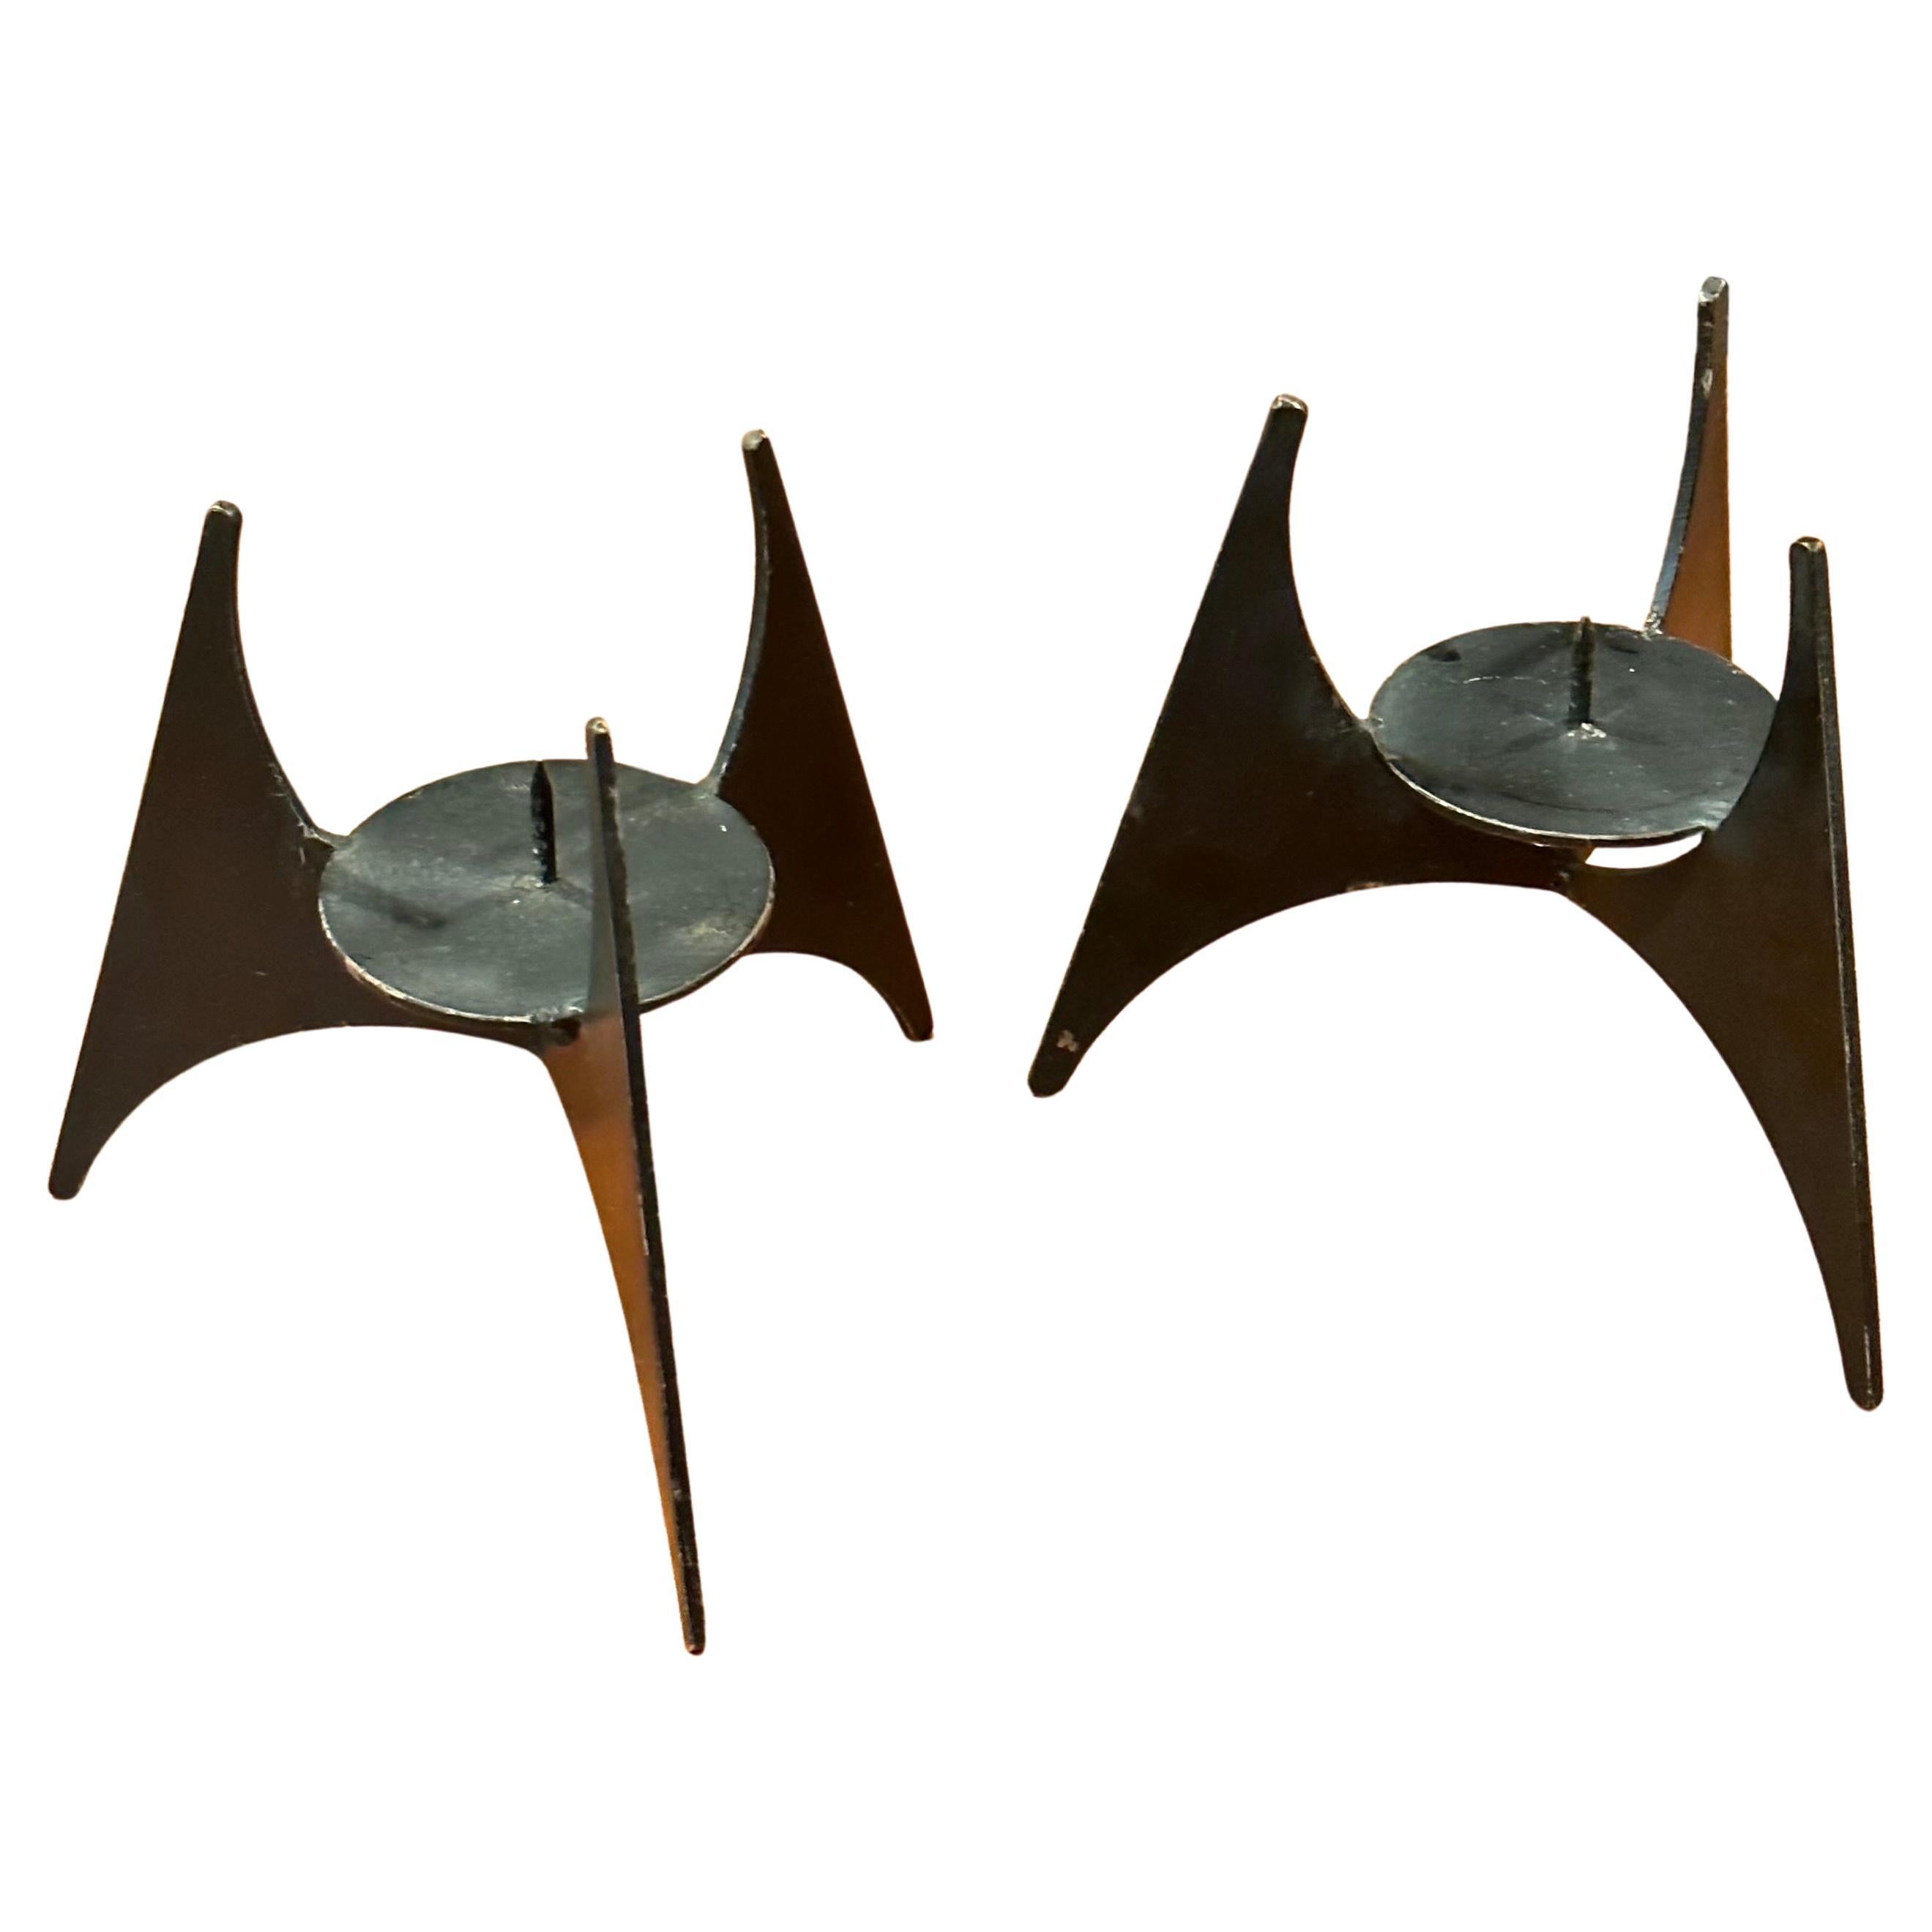 Pair of Modernist Cut Steel Candle Holders